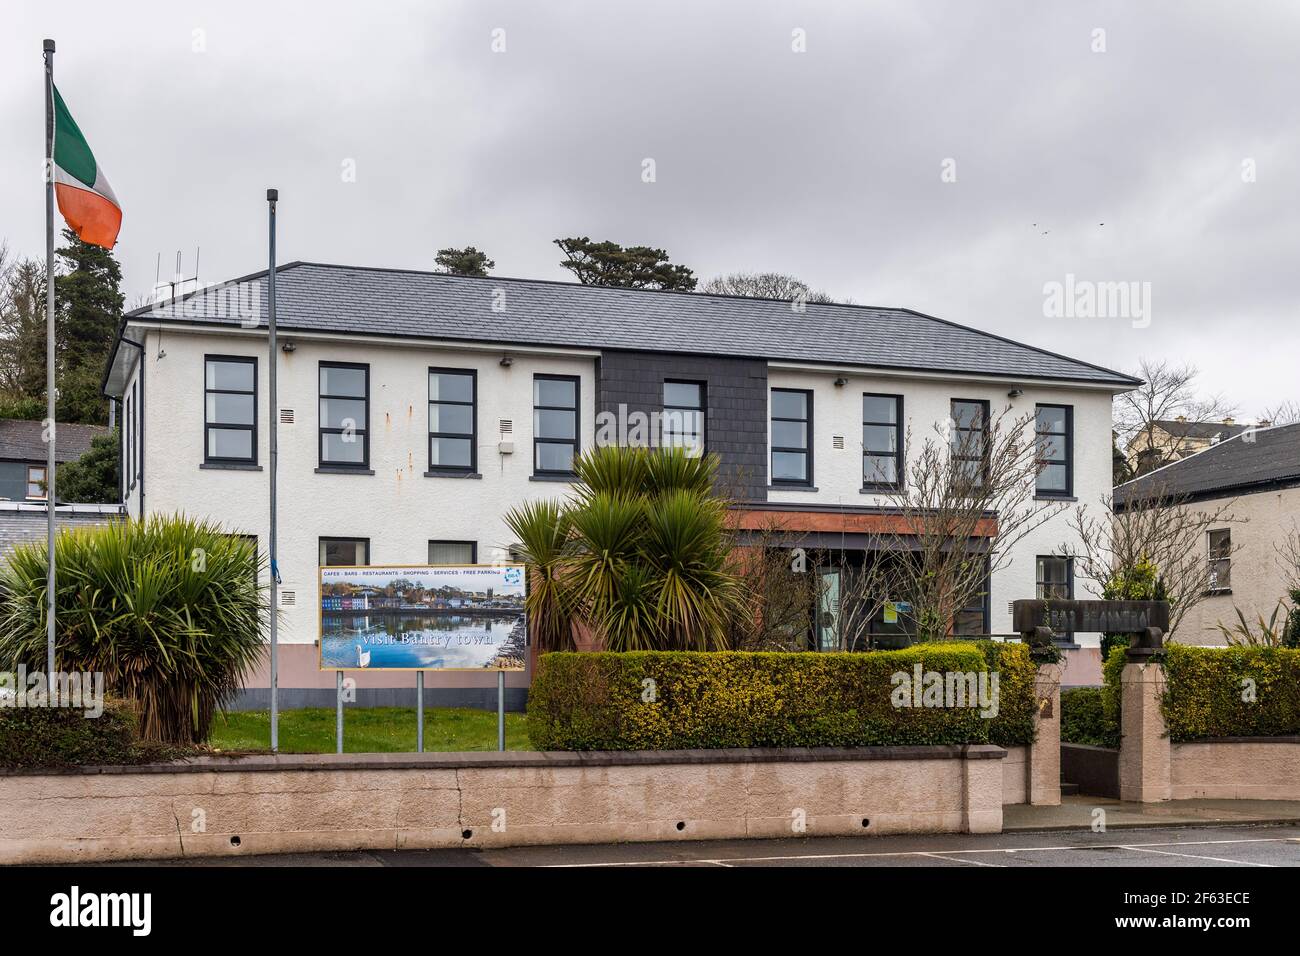 Bantry District Court in Bantry, West Cork, Irland. Stockfoto